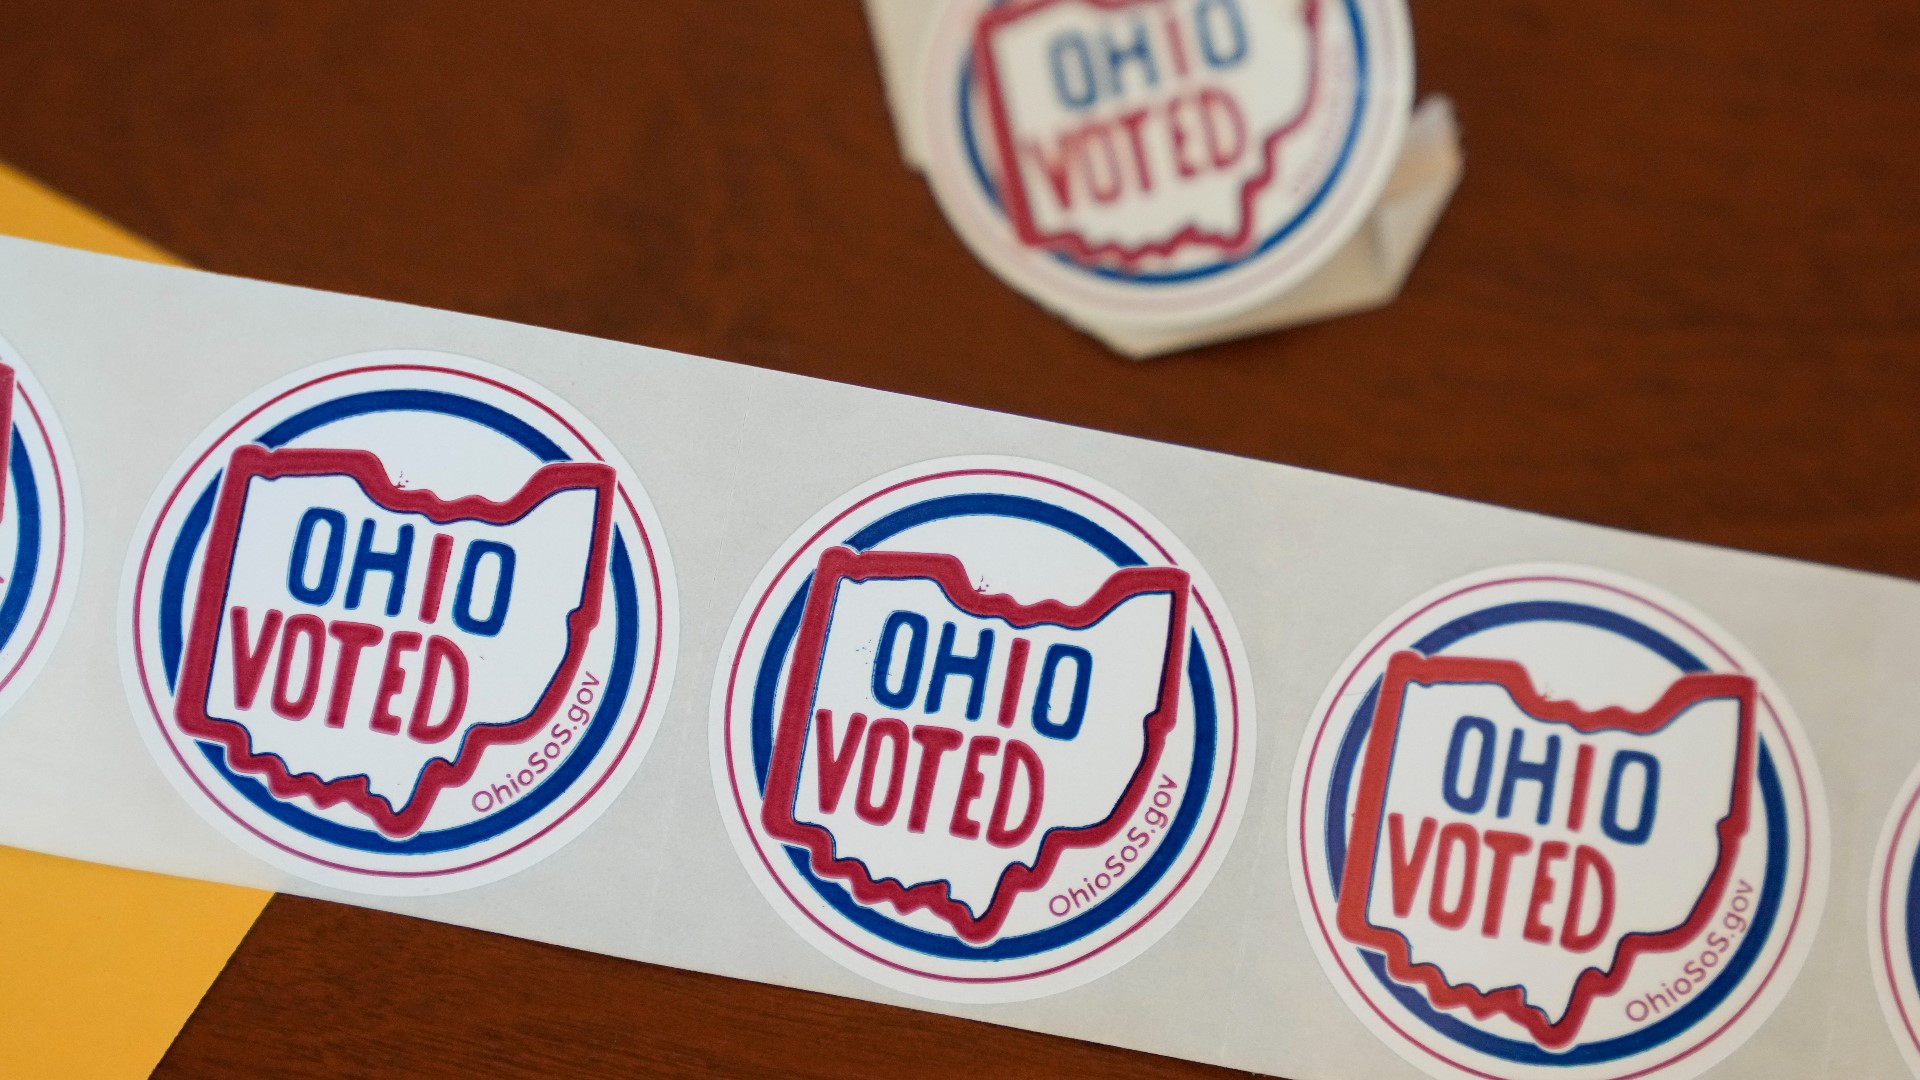 With Issue 1 failing, Ohio will maintain its existing simple majority requiring 50% plus one votes to pass a constitutional amendment in the state.